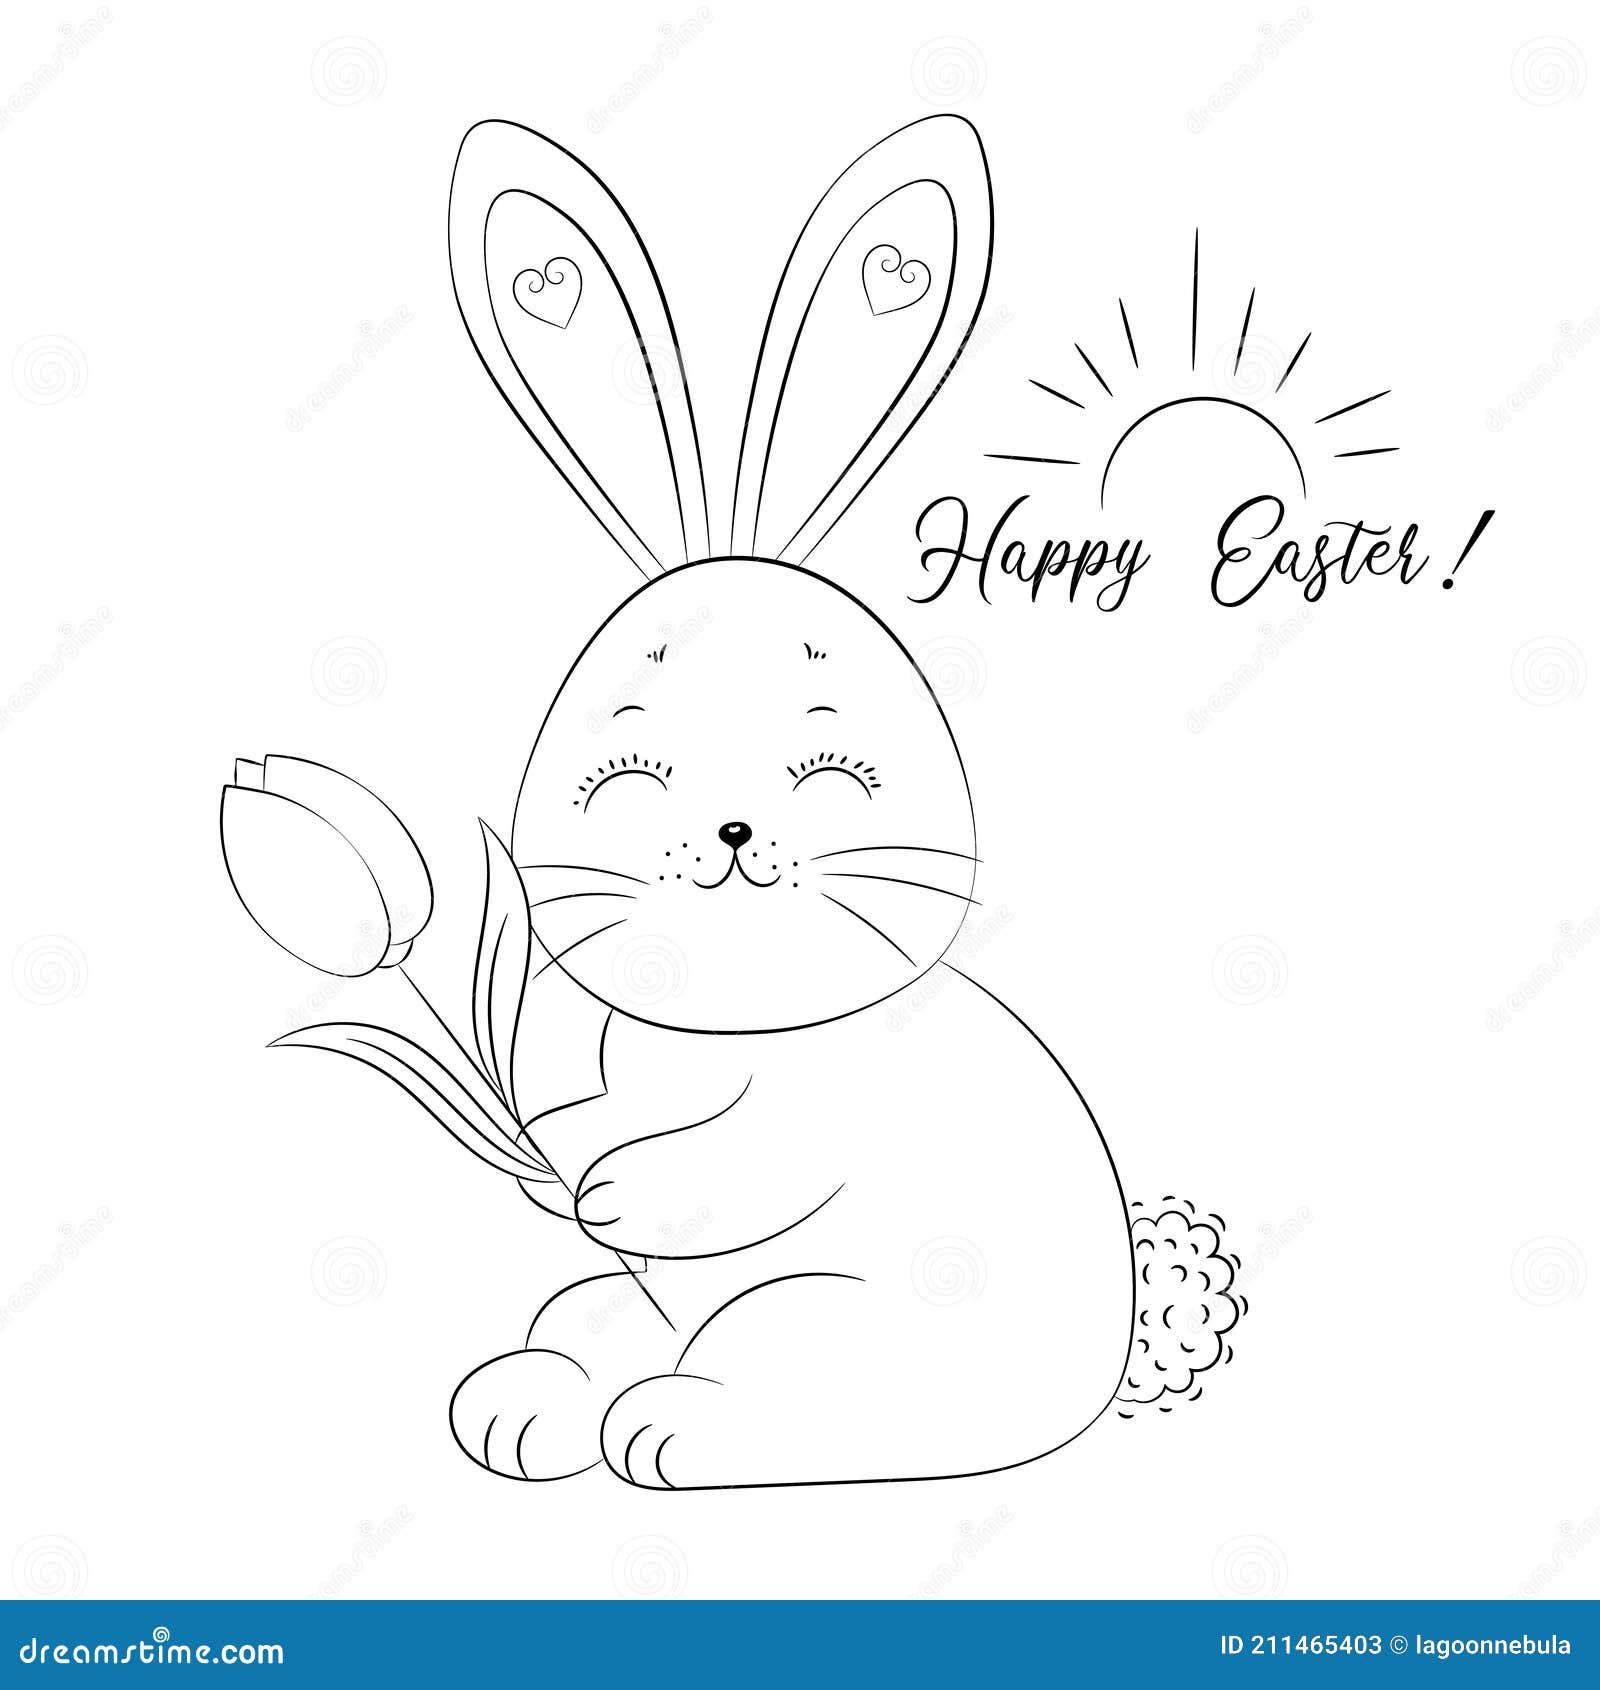 Bunny Drawing Happy Easter Coloring Page - ColoringAll